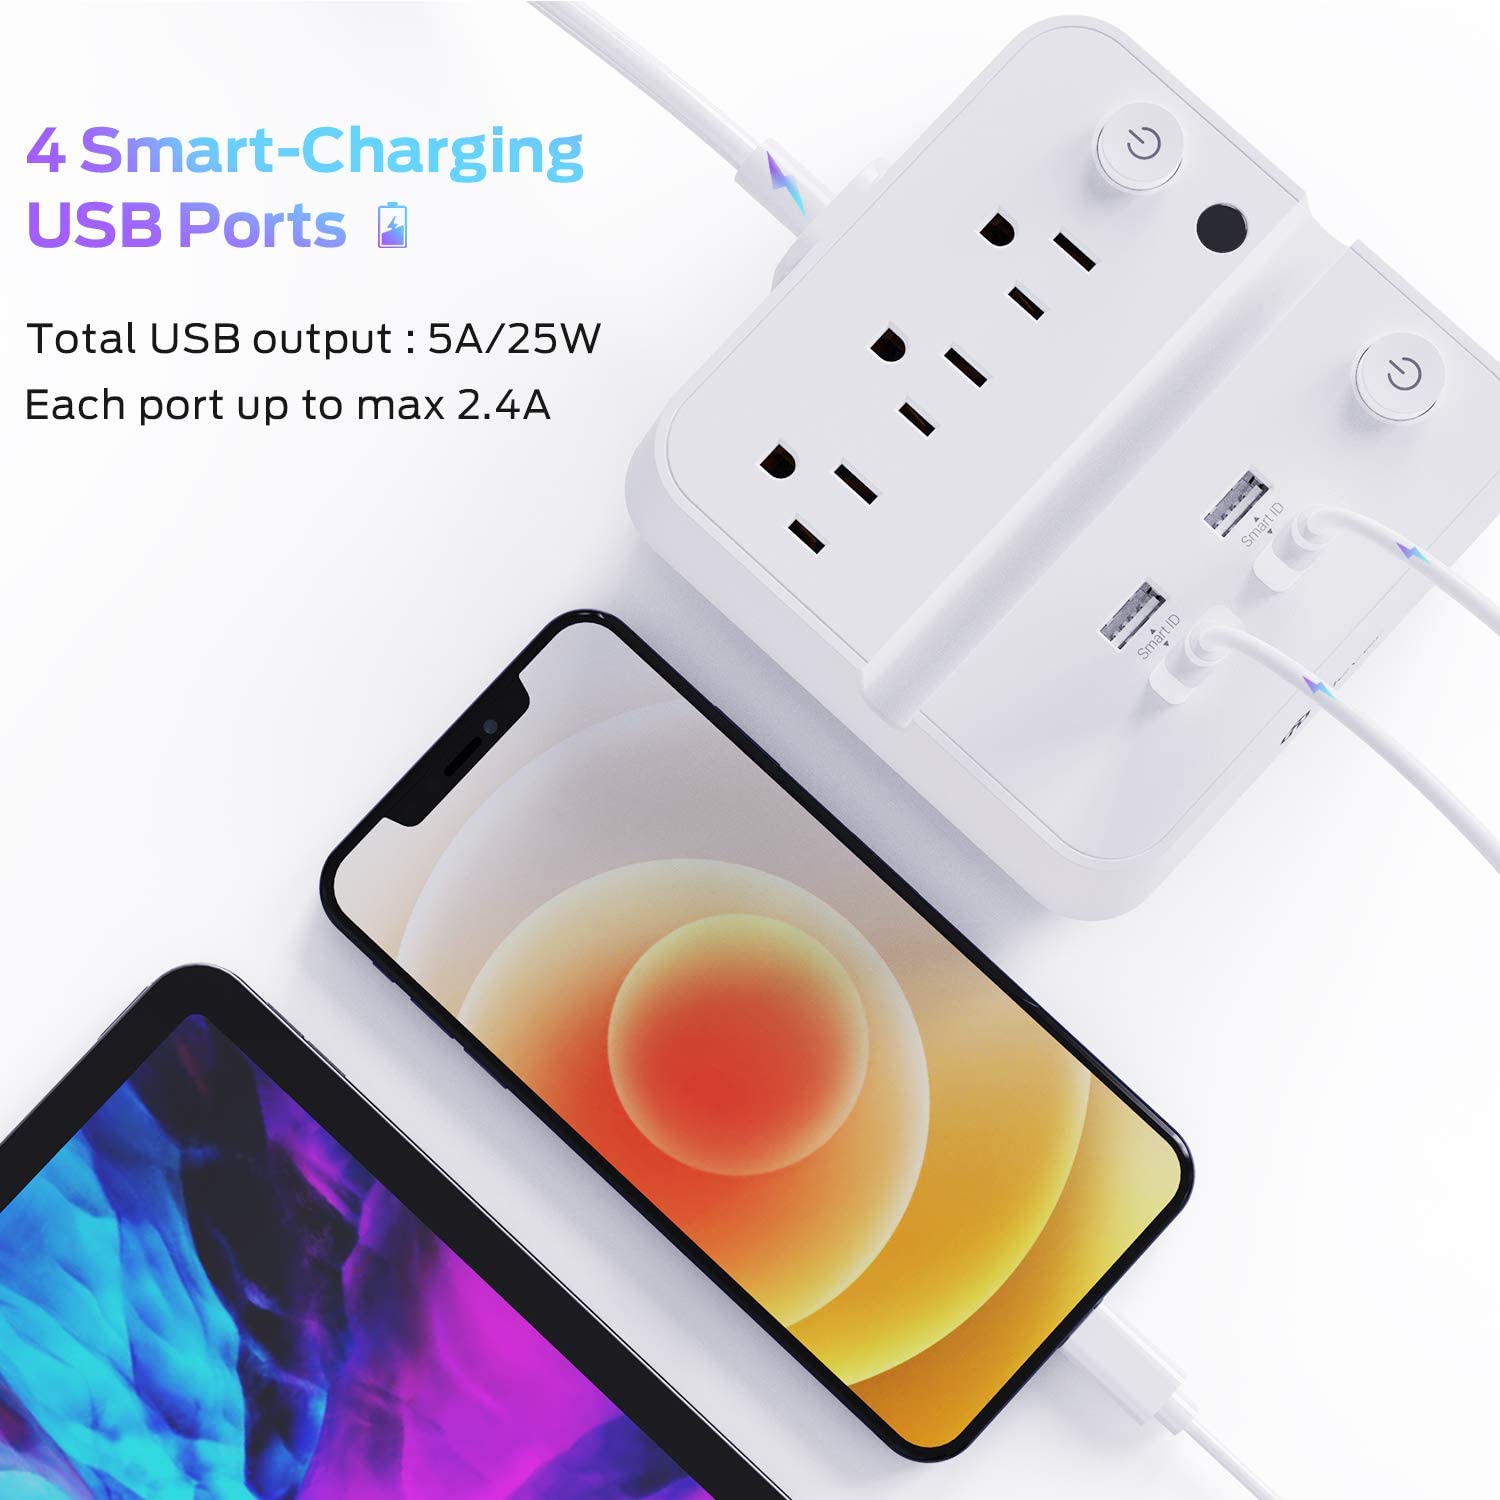 Power Strip with USB, iClever USB Charging Station with 3 Outlet 4 USB Ports, 10A 5ft Extension Cord, Dual Switch Control, Overload Protection, Phone Tablet Stand for Travel, Office, Hotel.